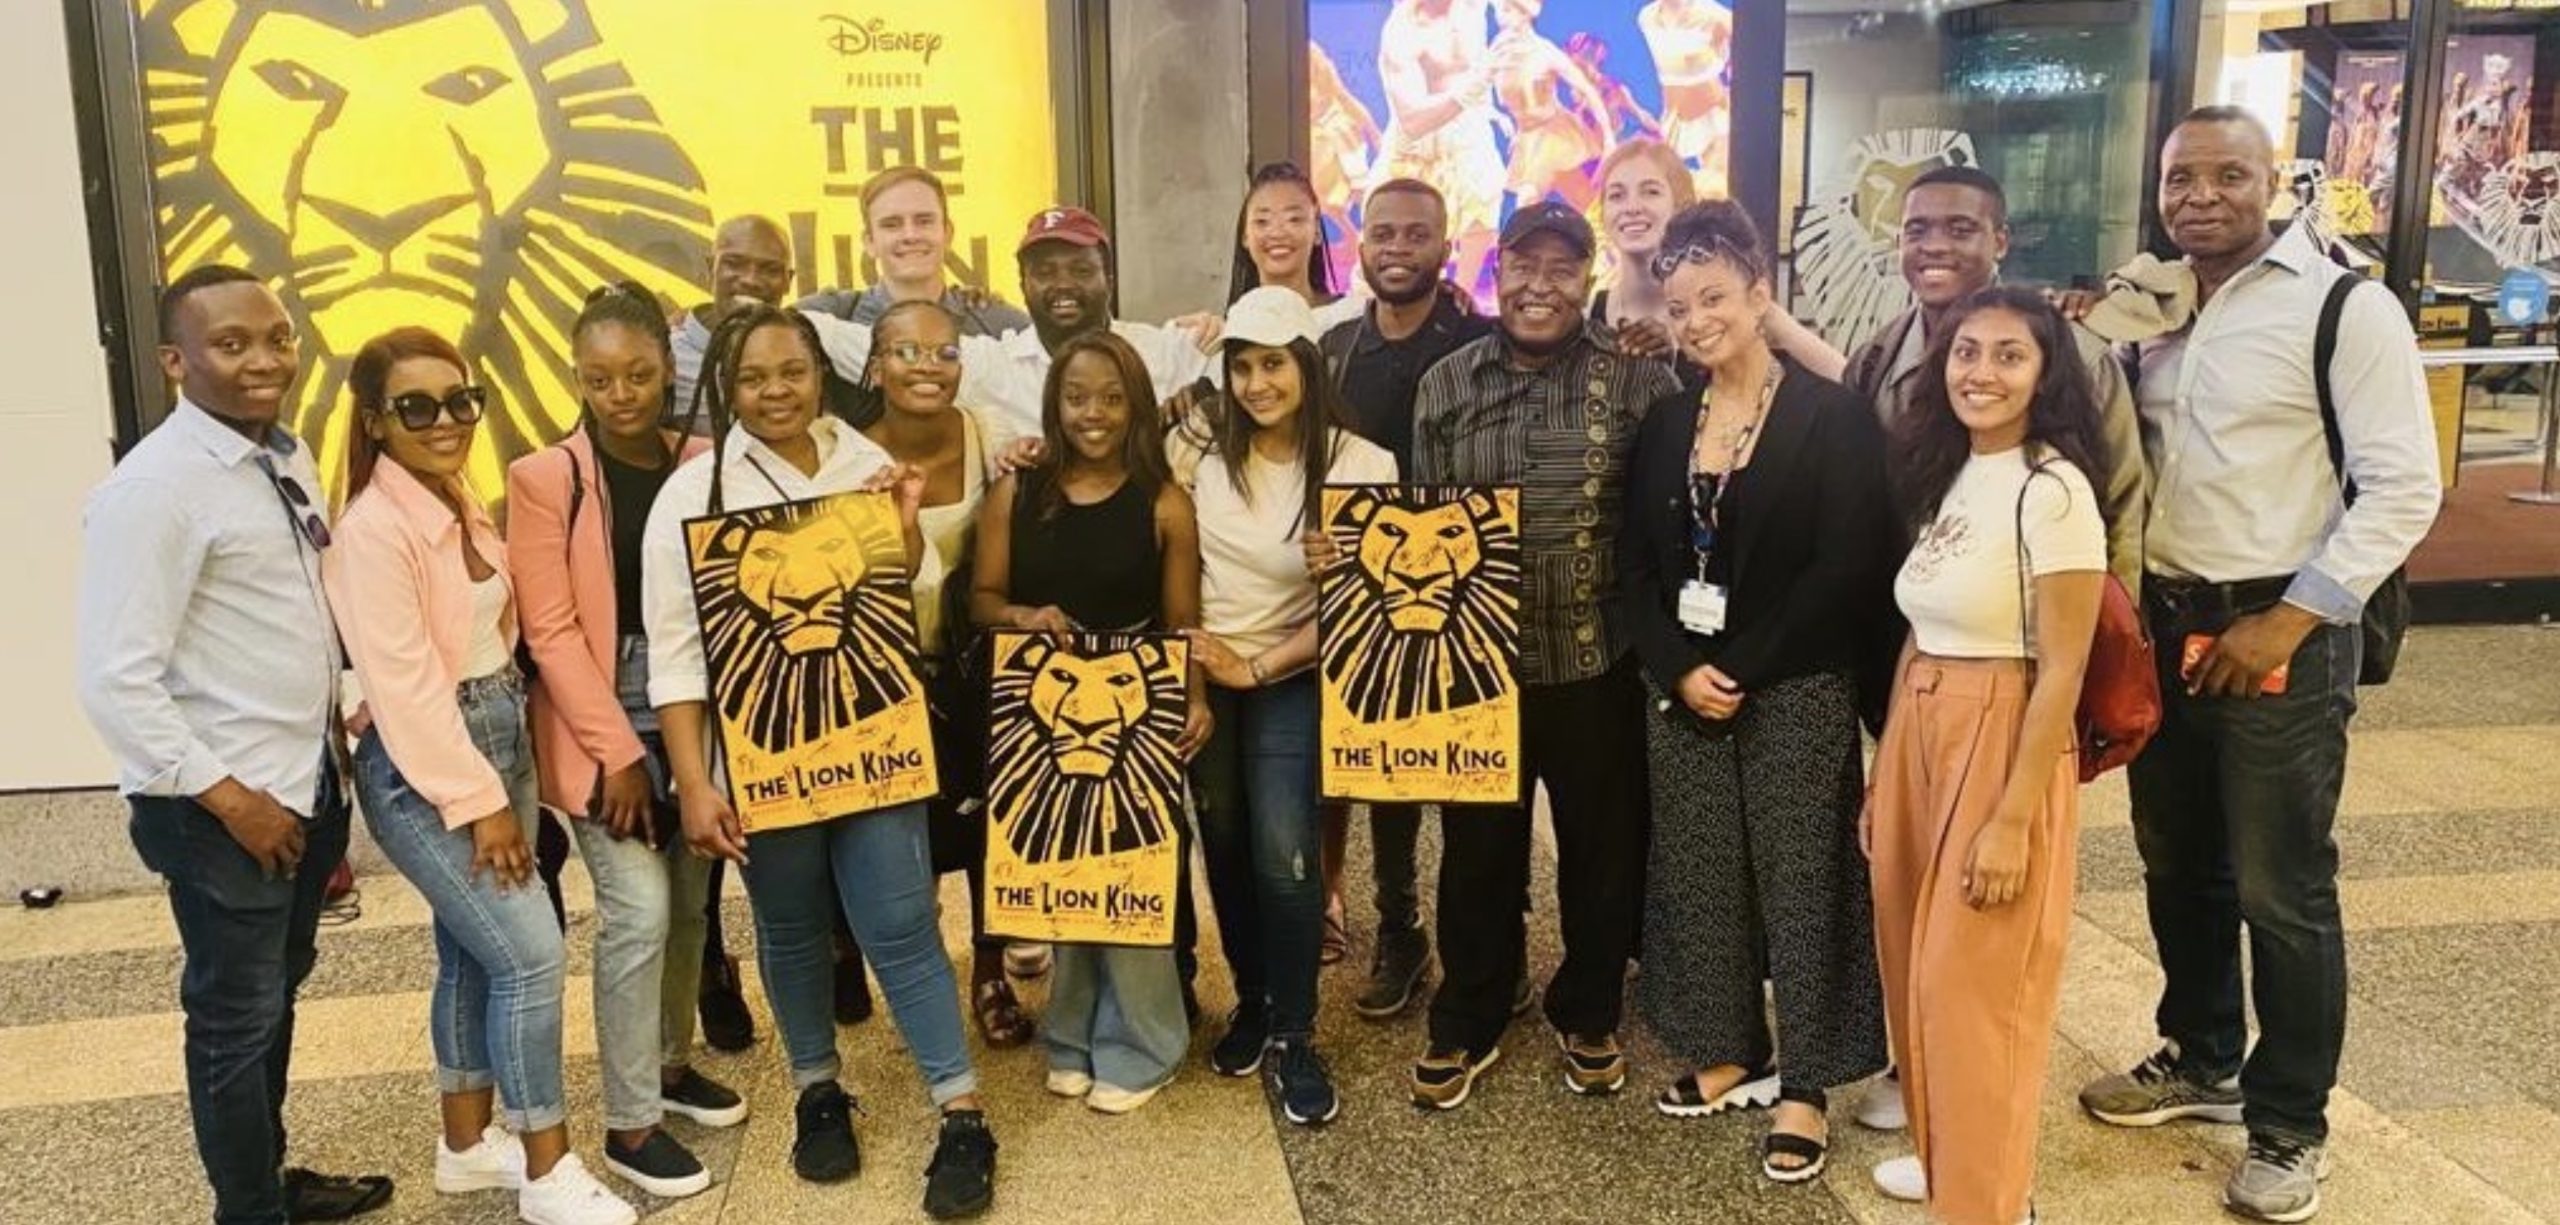 A group of people smile while holding posters of a yellow cartoon lion.